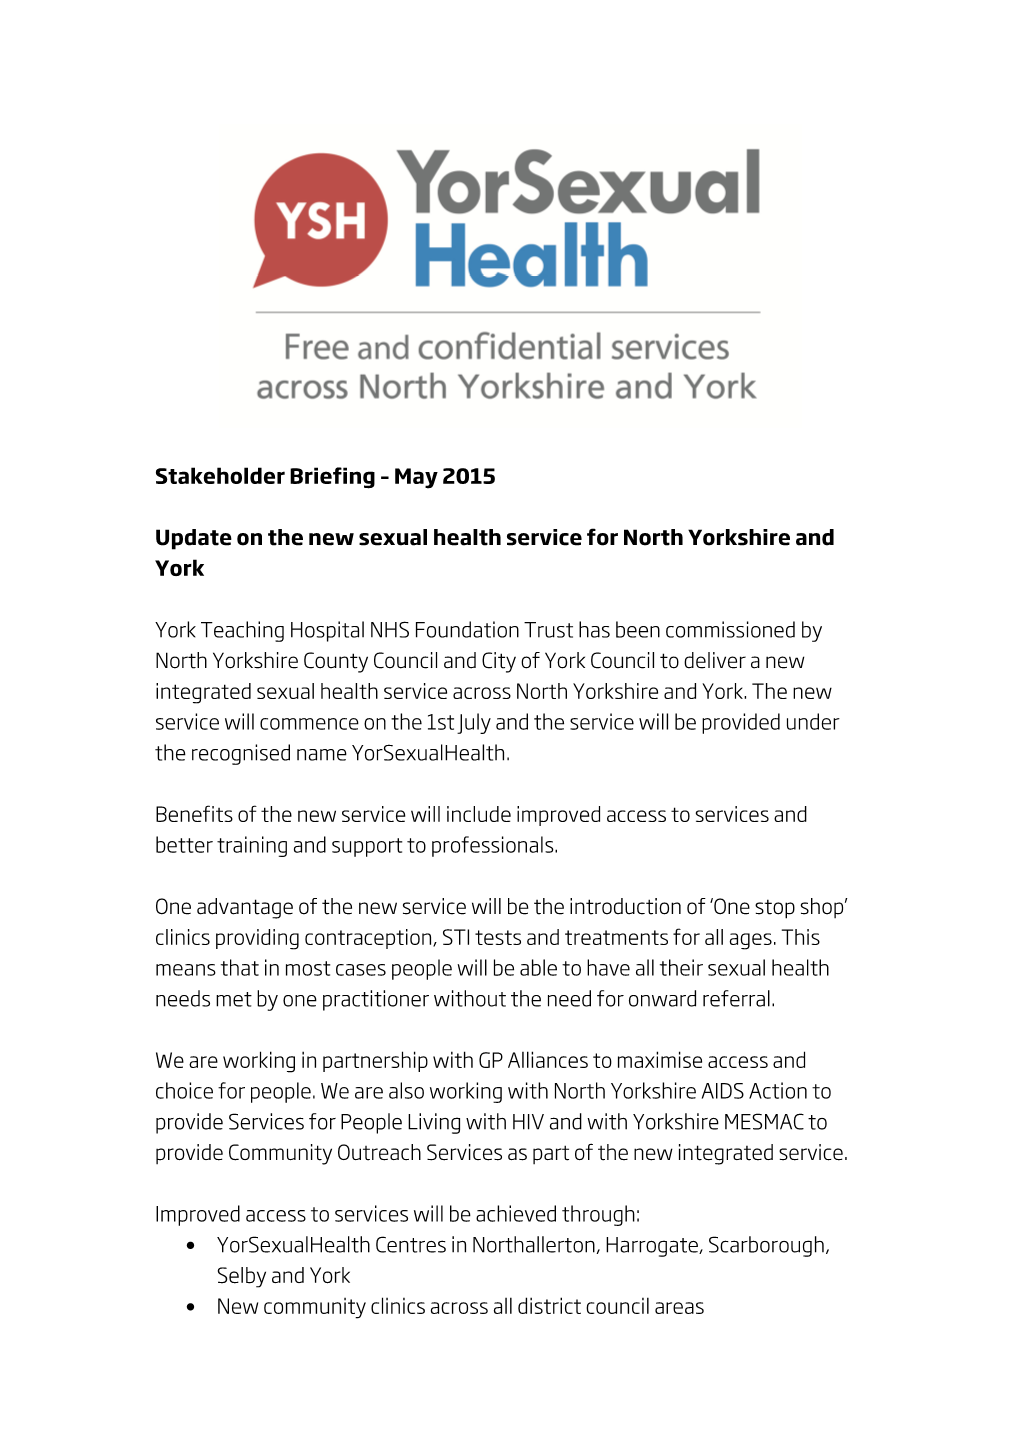 May 2015 Update on the New Sexual Health Service